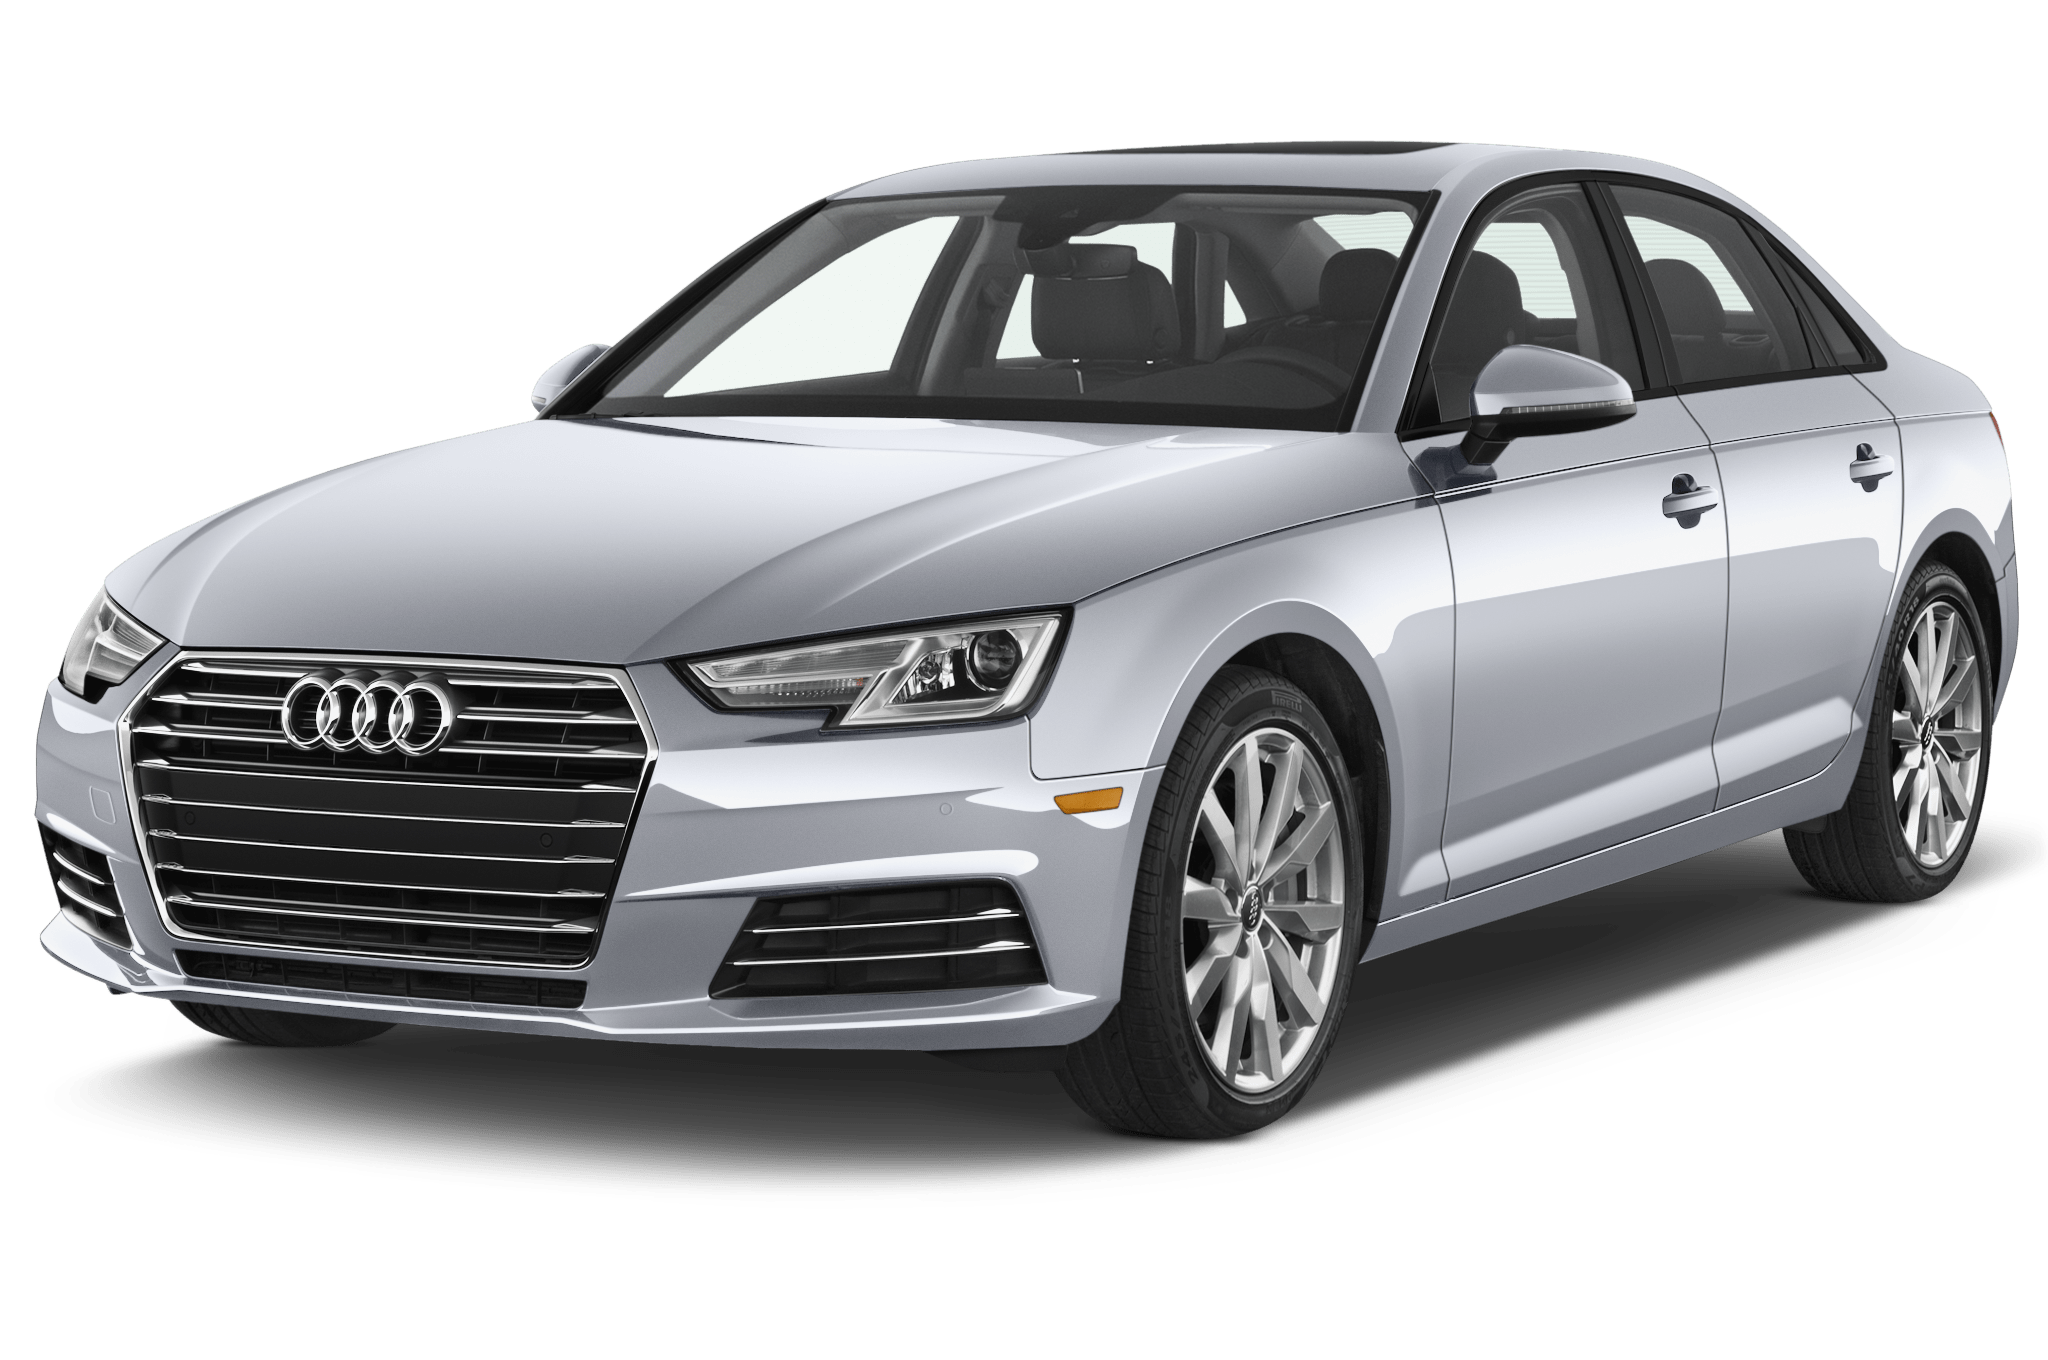 Facelifted Audi A4 Booking open now